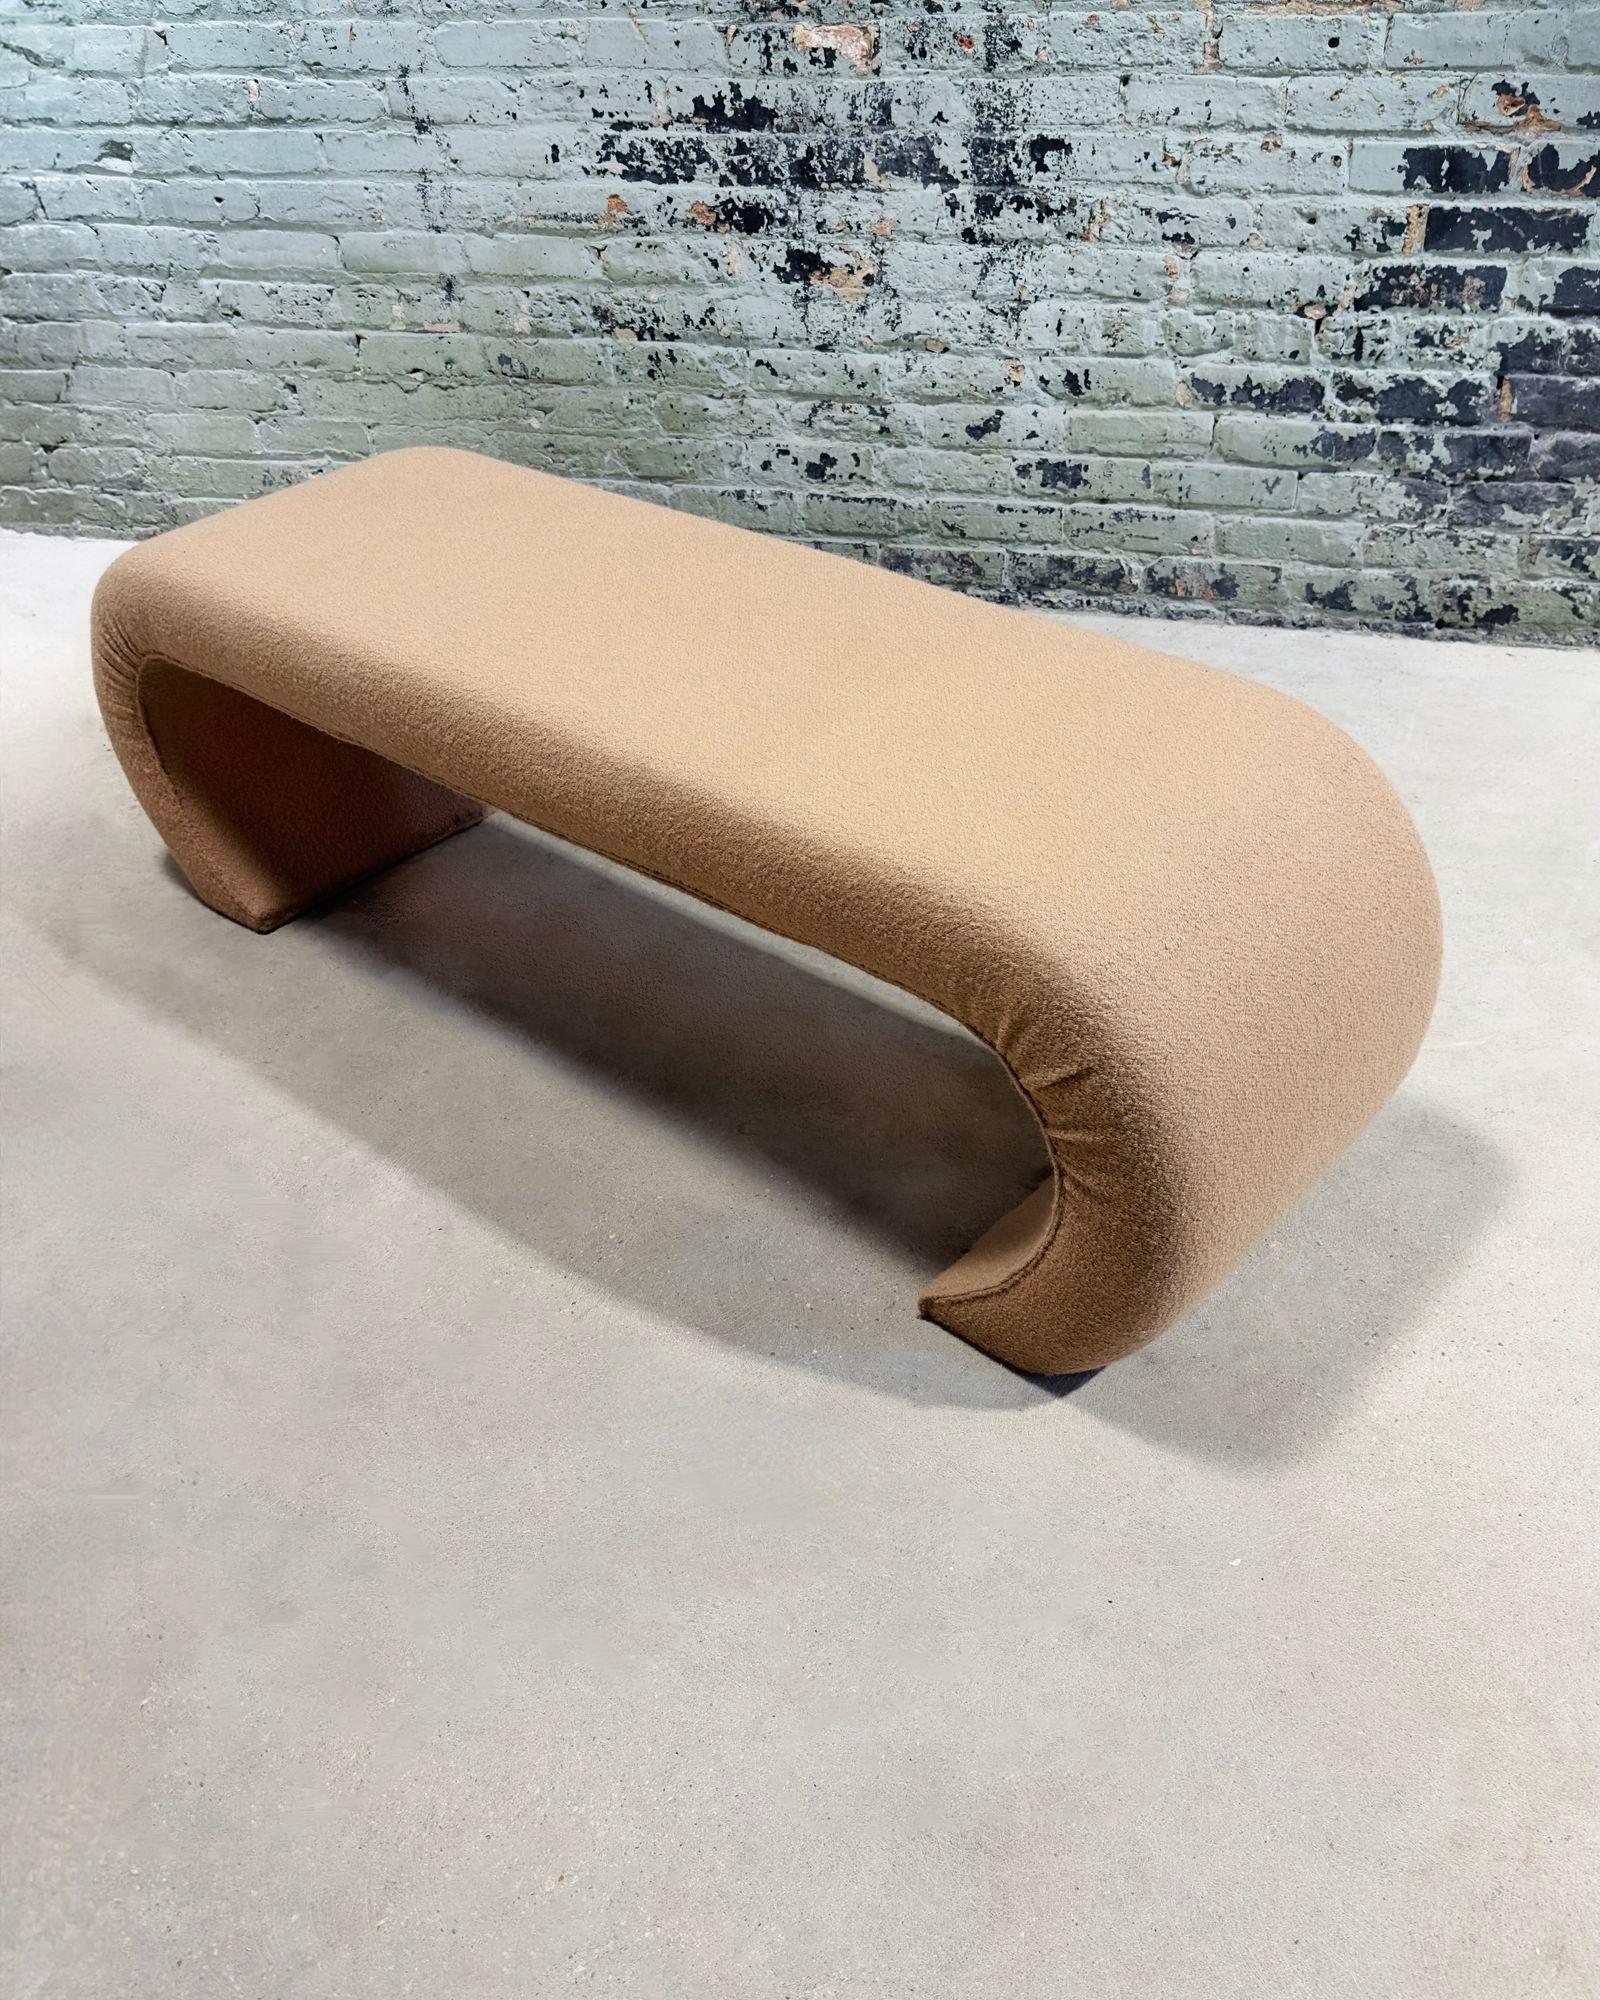 Mid Century Waterfall Bench in Camel Color Boucle, 1970. Bench has been newly upholstered in a camel color boucle.
Measures 60